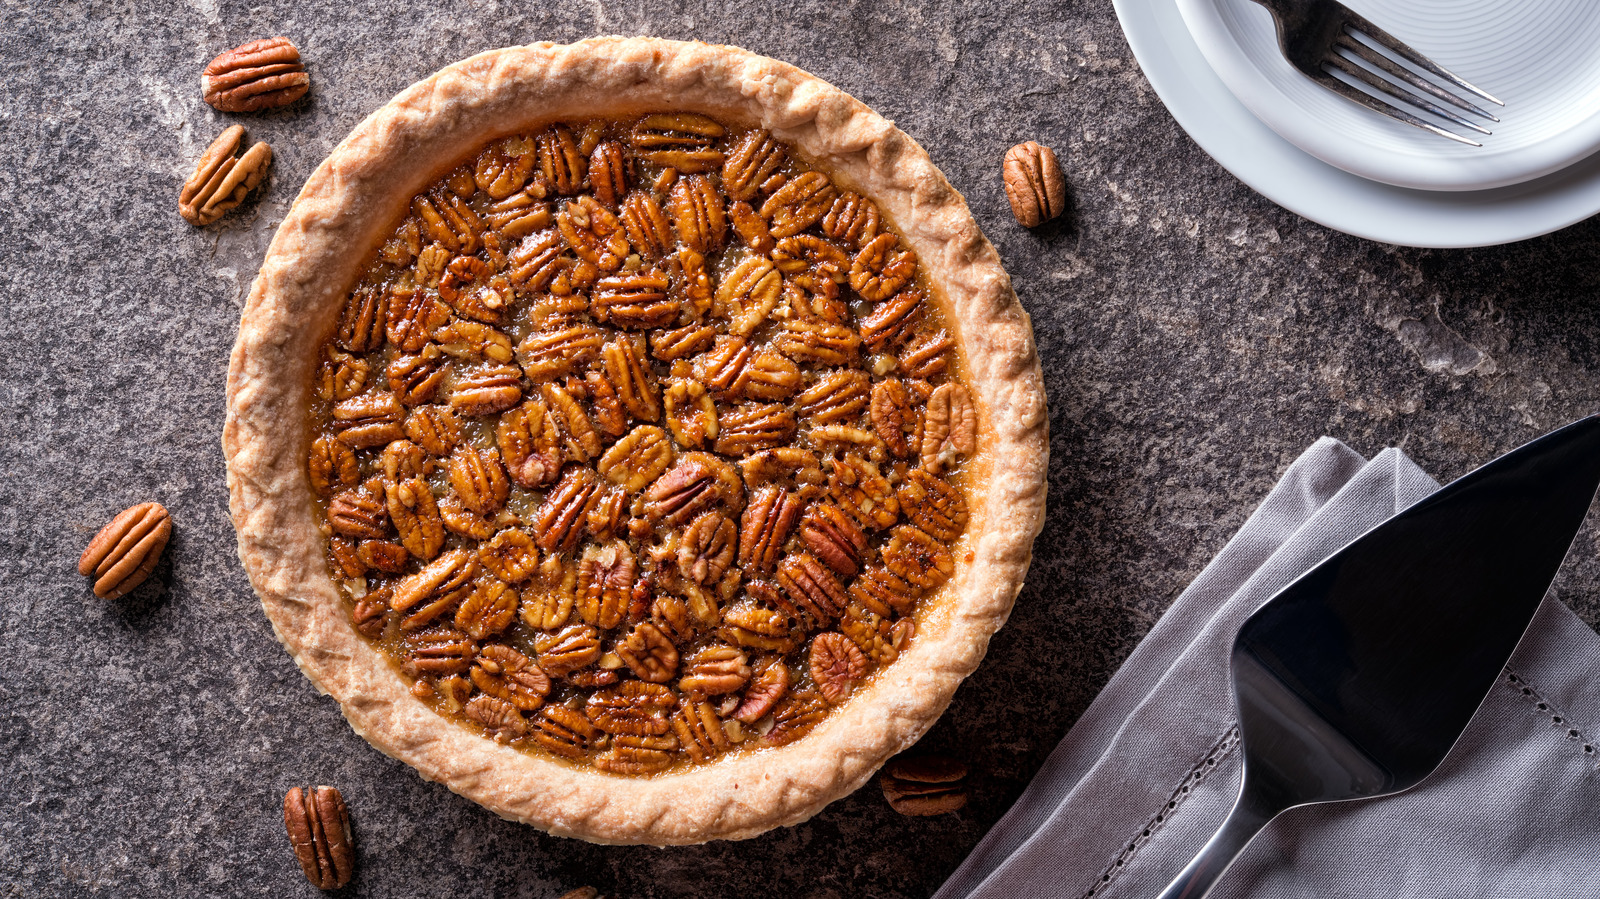 The World's Largest Pecan Pie Required An Absurd Amount Of Ingredients